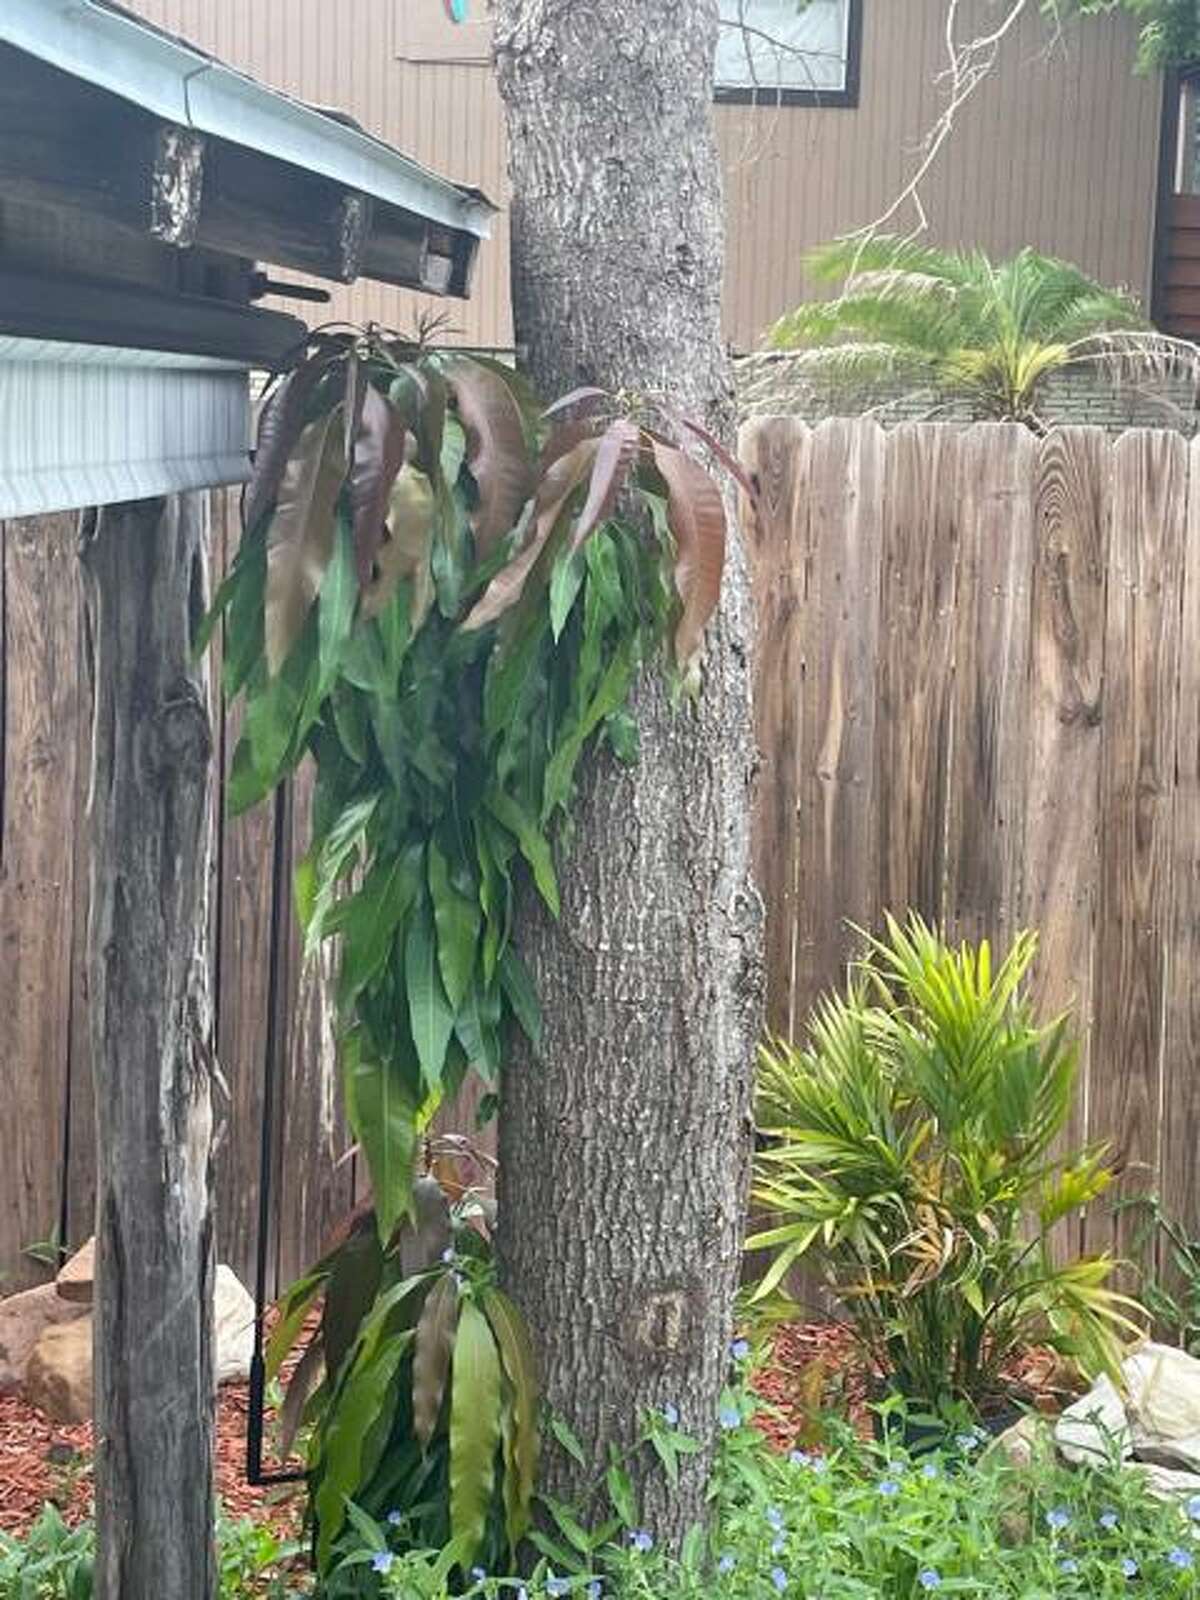 This mango tree has new growth from the base. Prune dead limbs above that point to clean it up and call an arborist, if help is needed.